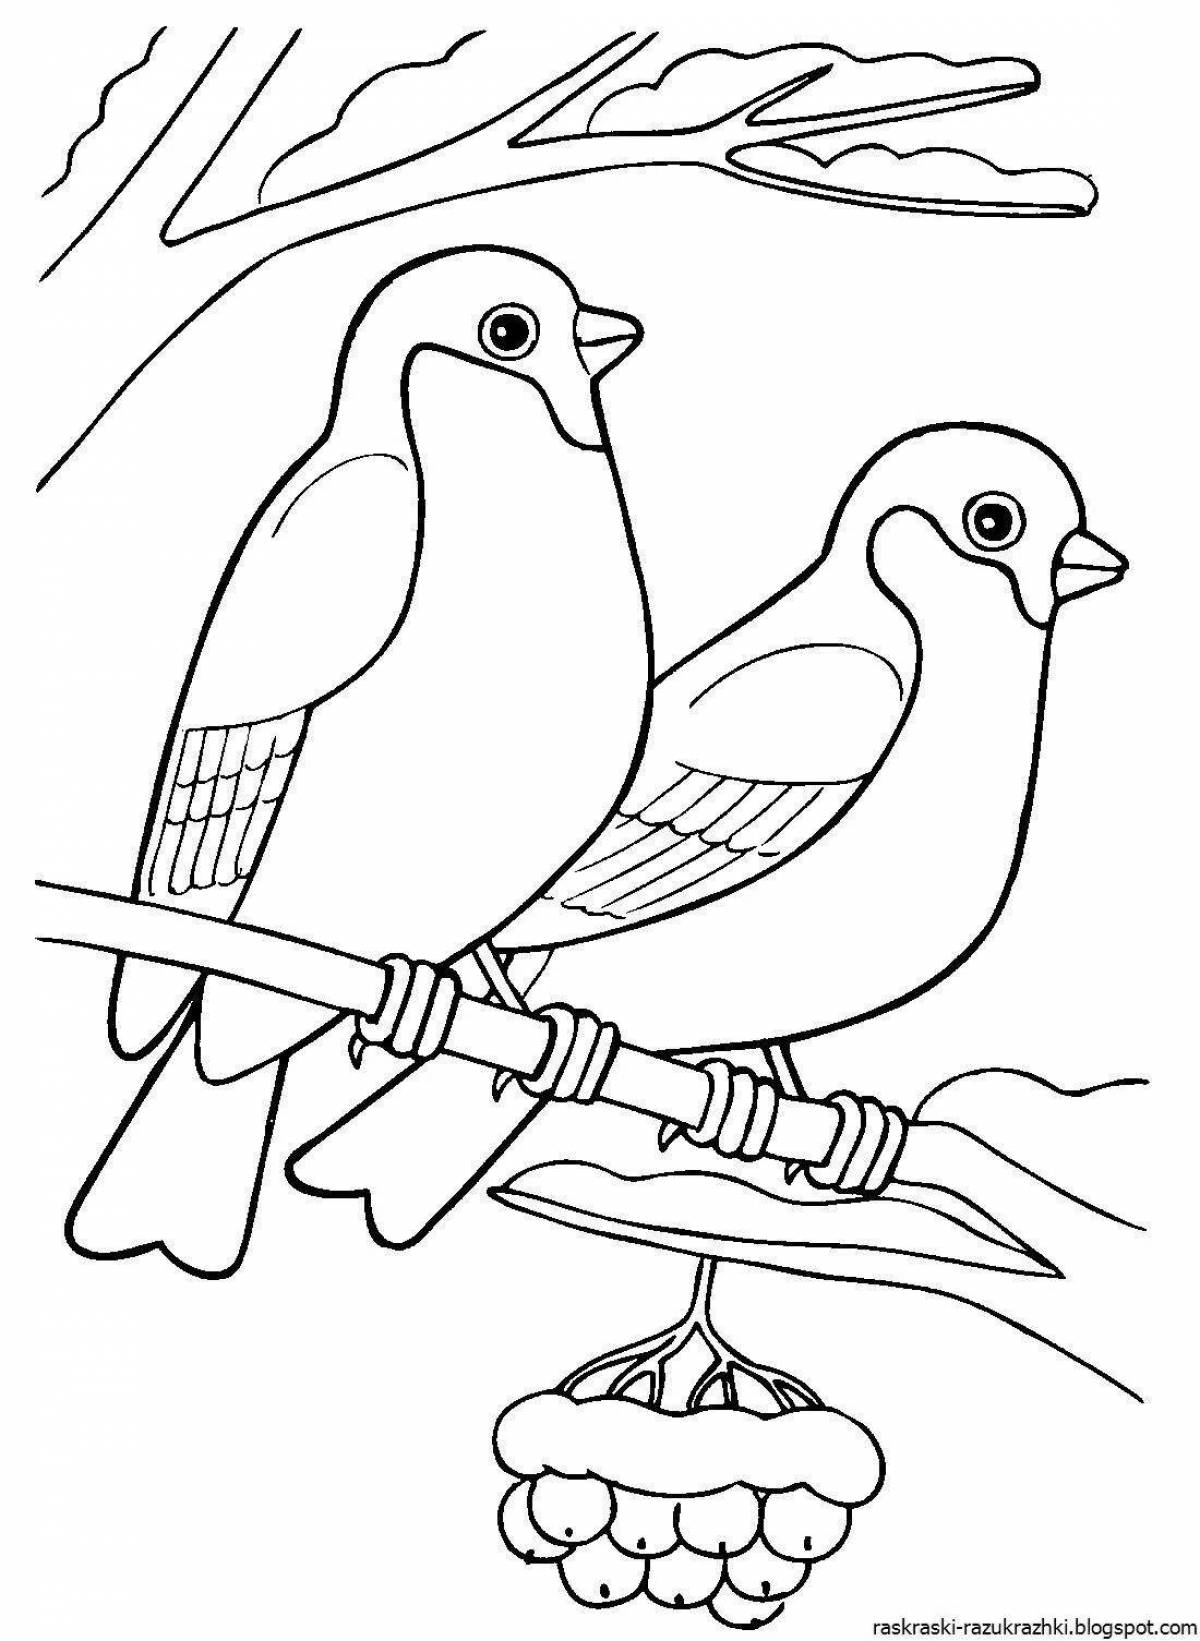 Upbeat bird coloring pages for kids